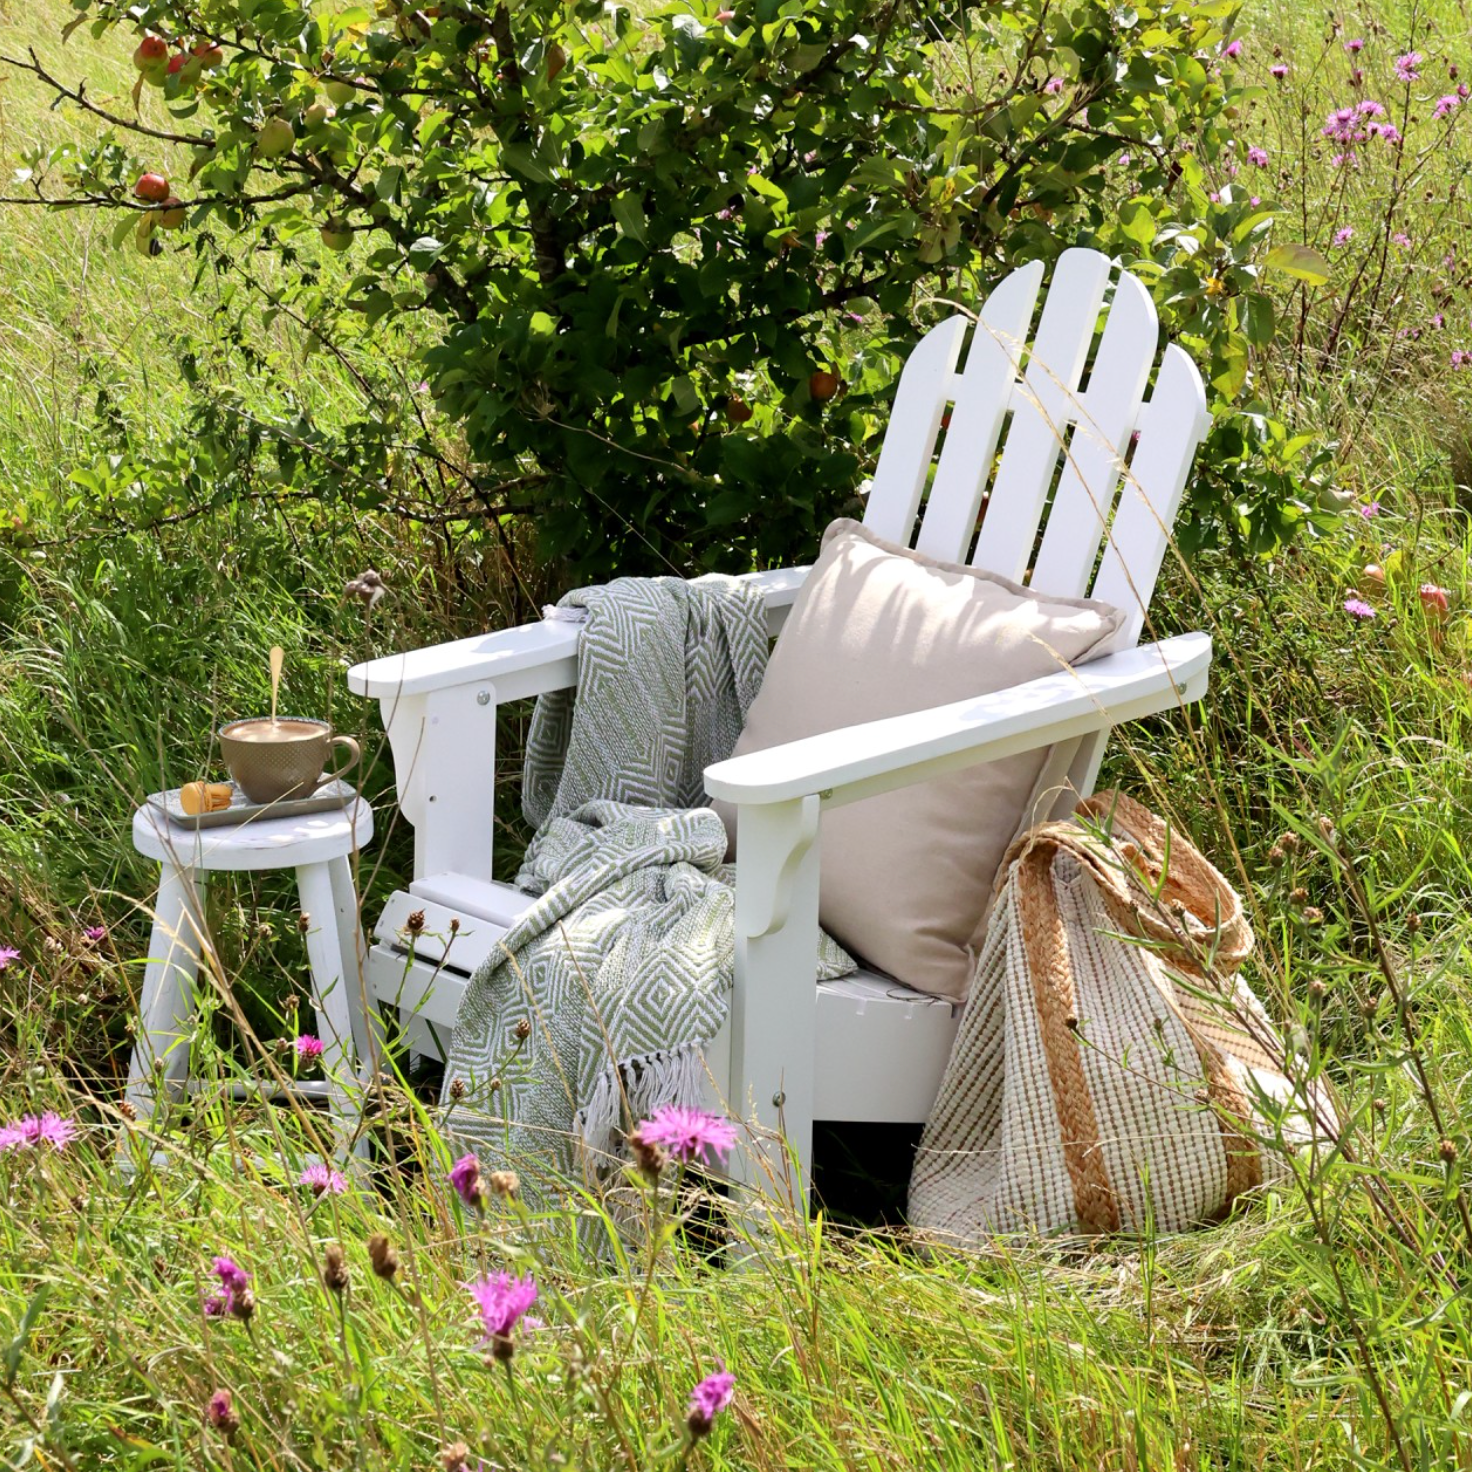 white wooden outdoor chair in field with wild flowers.